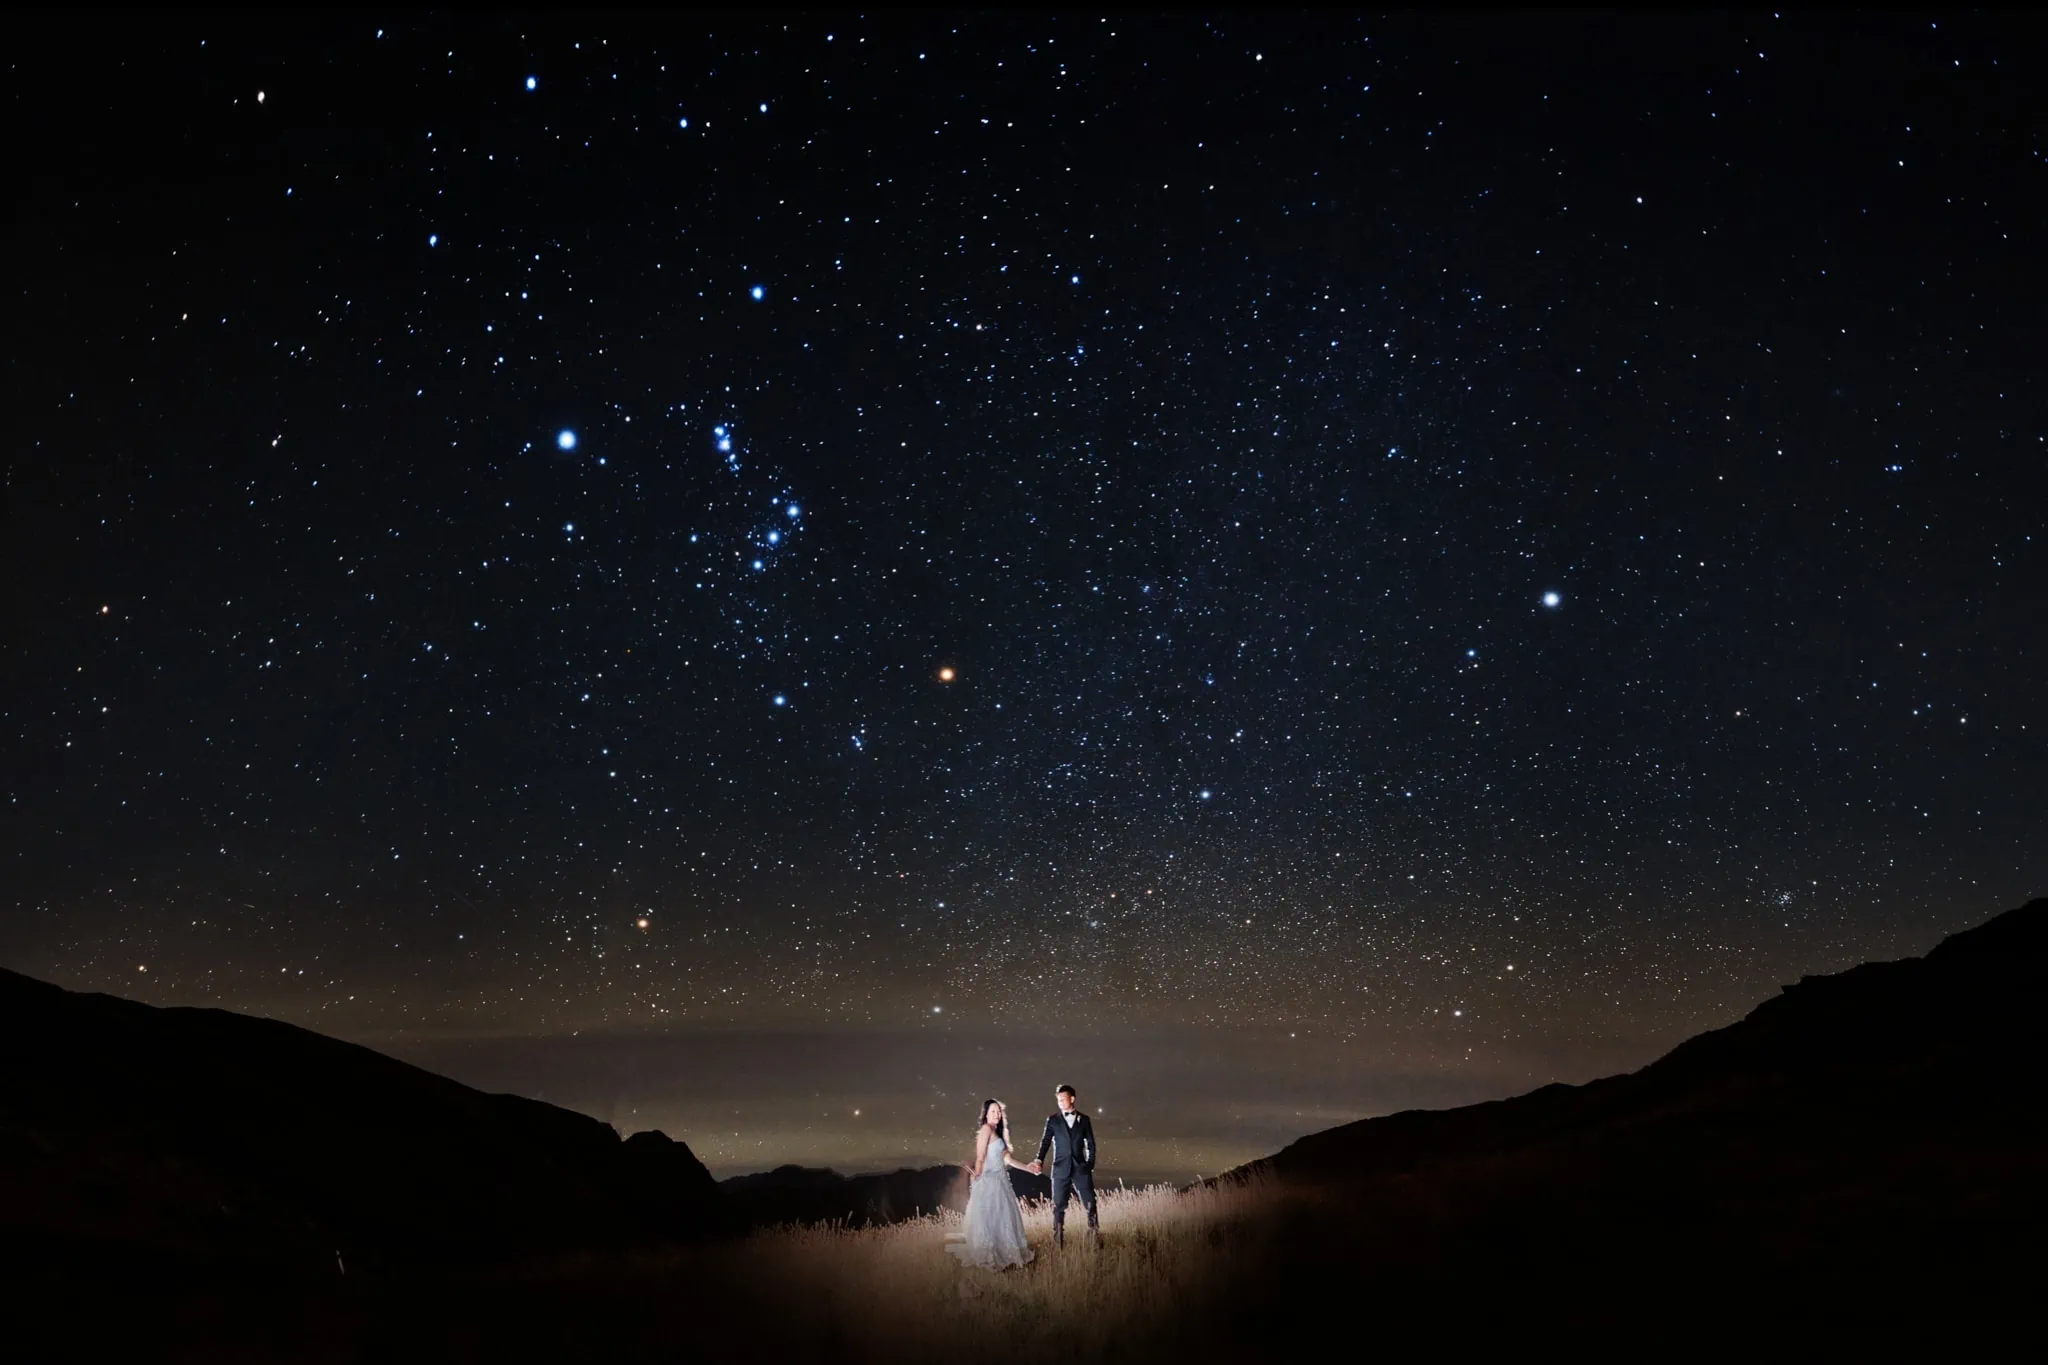 Queenstown New Zealand Elopement Wedding Photographer - A Starry Night Shoot featuring a bride and groom under a starry sky, showcased in our Portfolio.